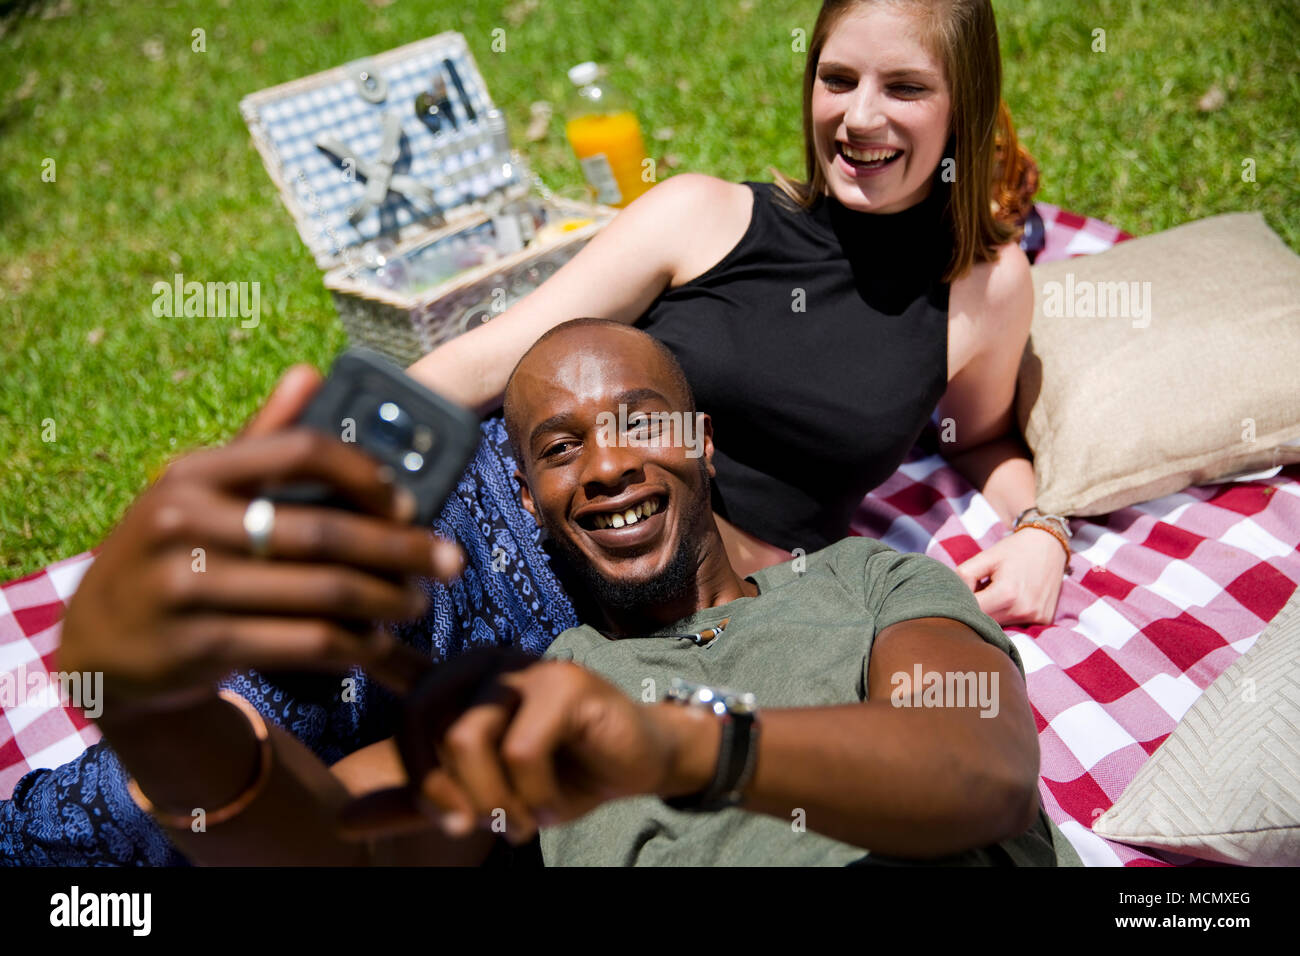 Couple taking a selfie at a picnic in a park Stock Photo